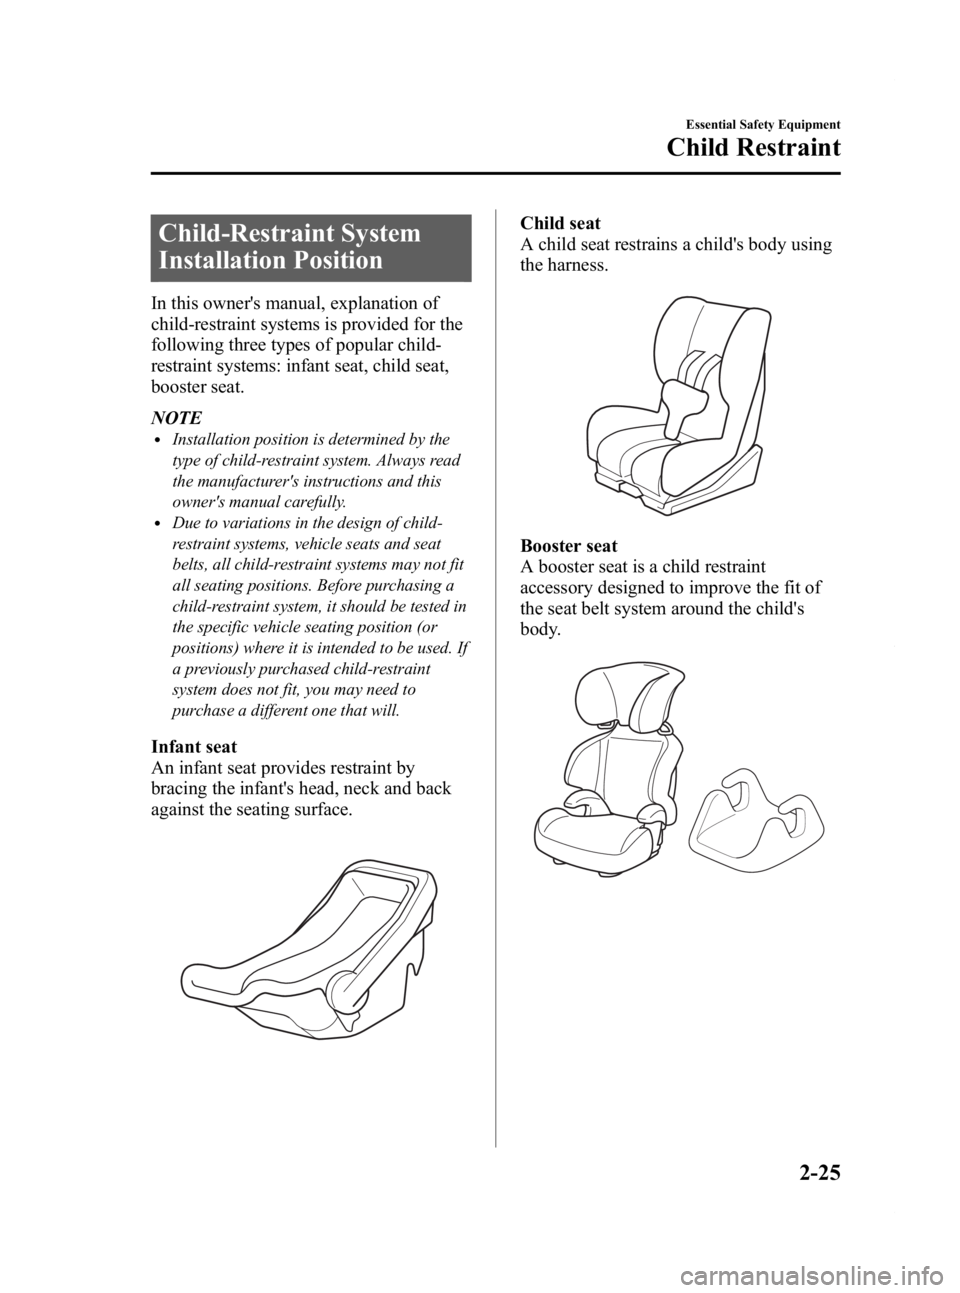 MAZDA MODEL 2 2012 Owners Guide Black plate (37,1)
Child-Restraint System
Installation Position
In this owners manual, explanation of
child-restraint systems is provided for the
following three types of popular child-
restraint sys